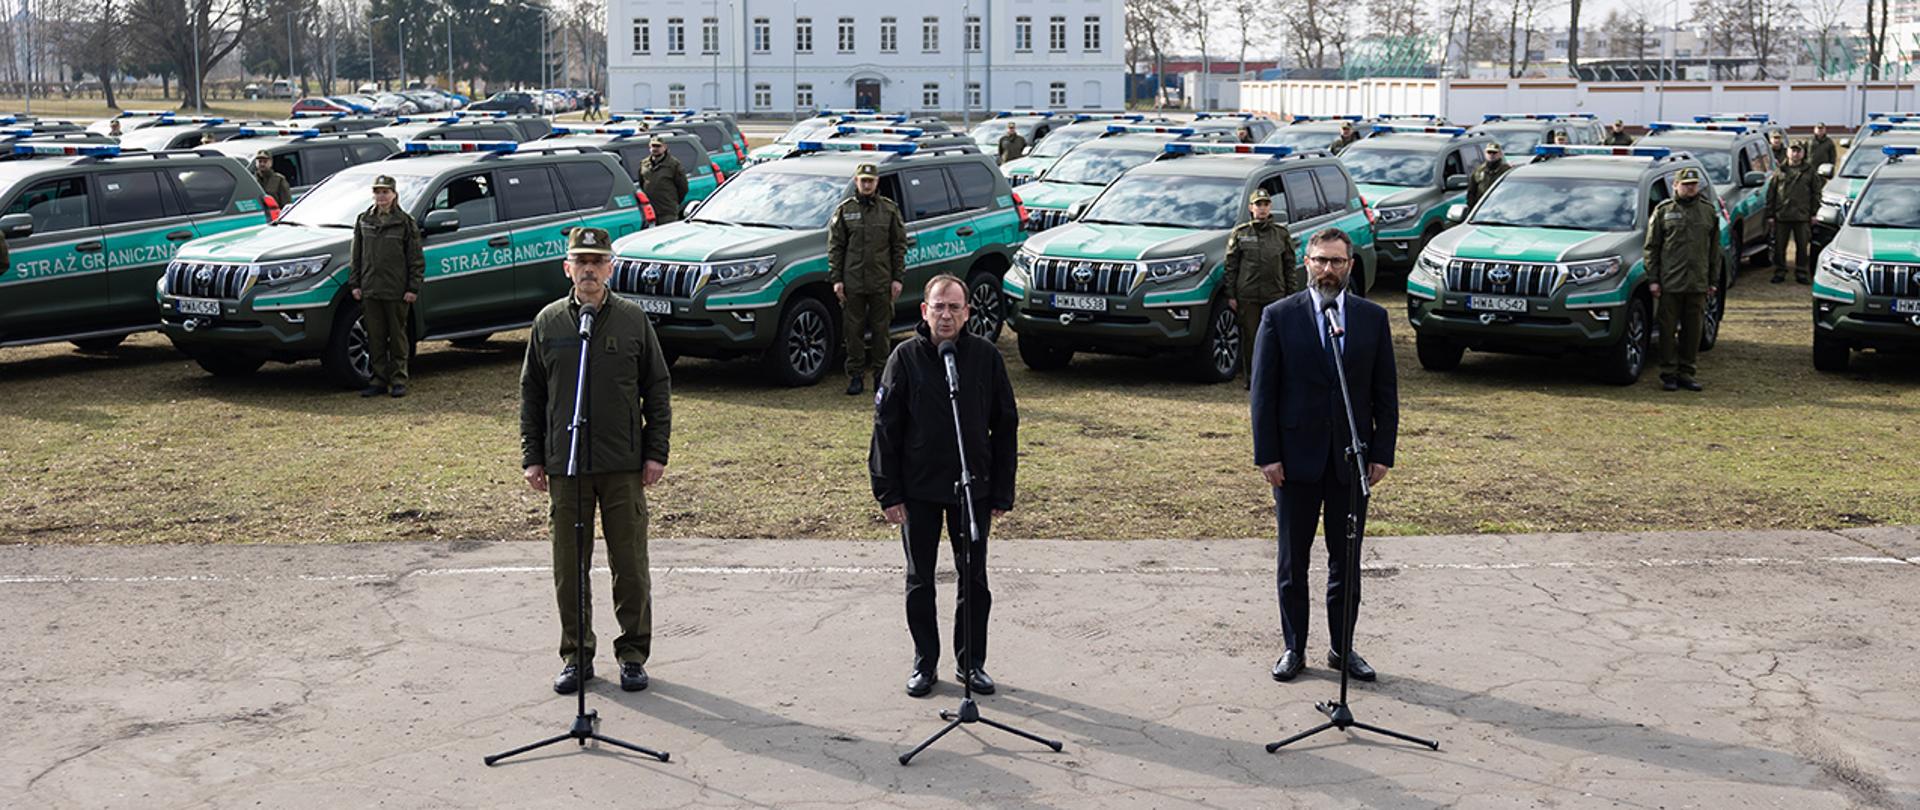 62 new off-road vehicles for the Border Guard – ceremony attended by Minister Mariusz Kamiński